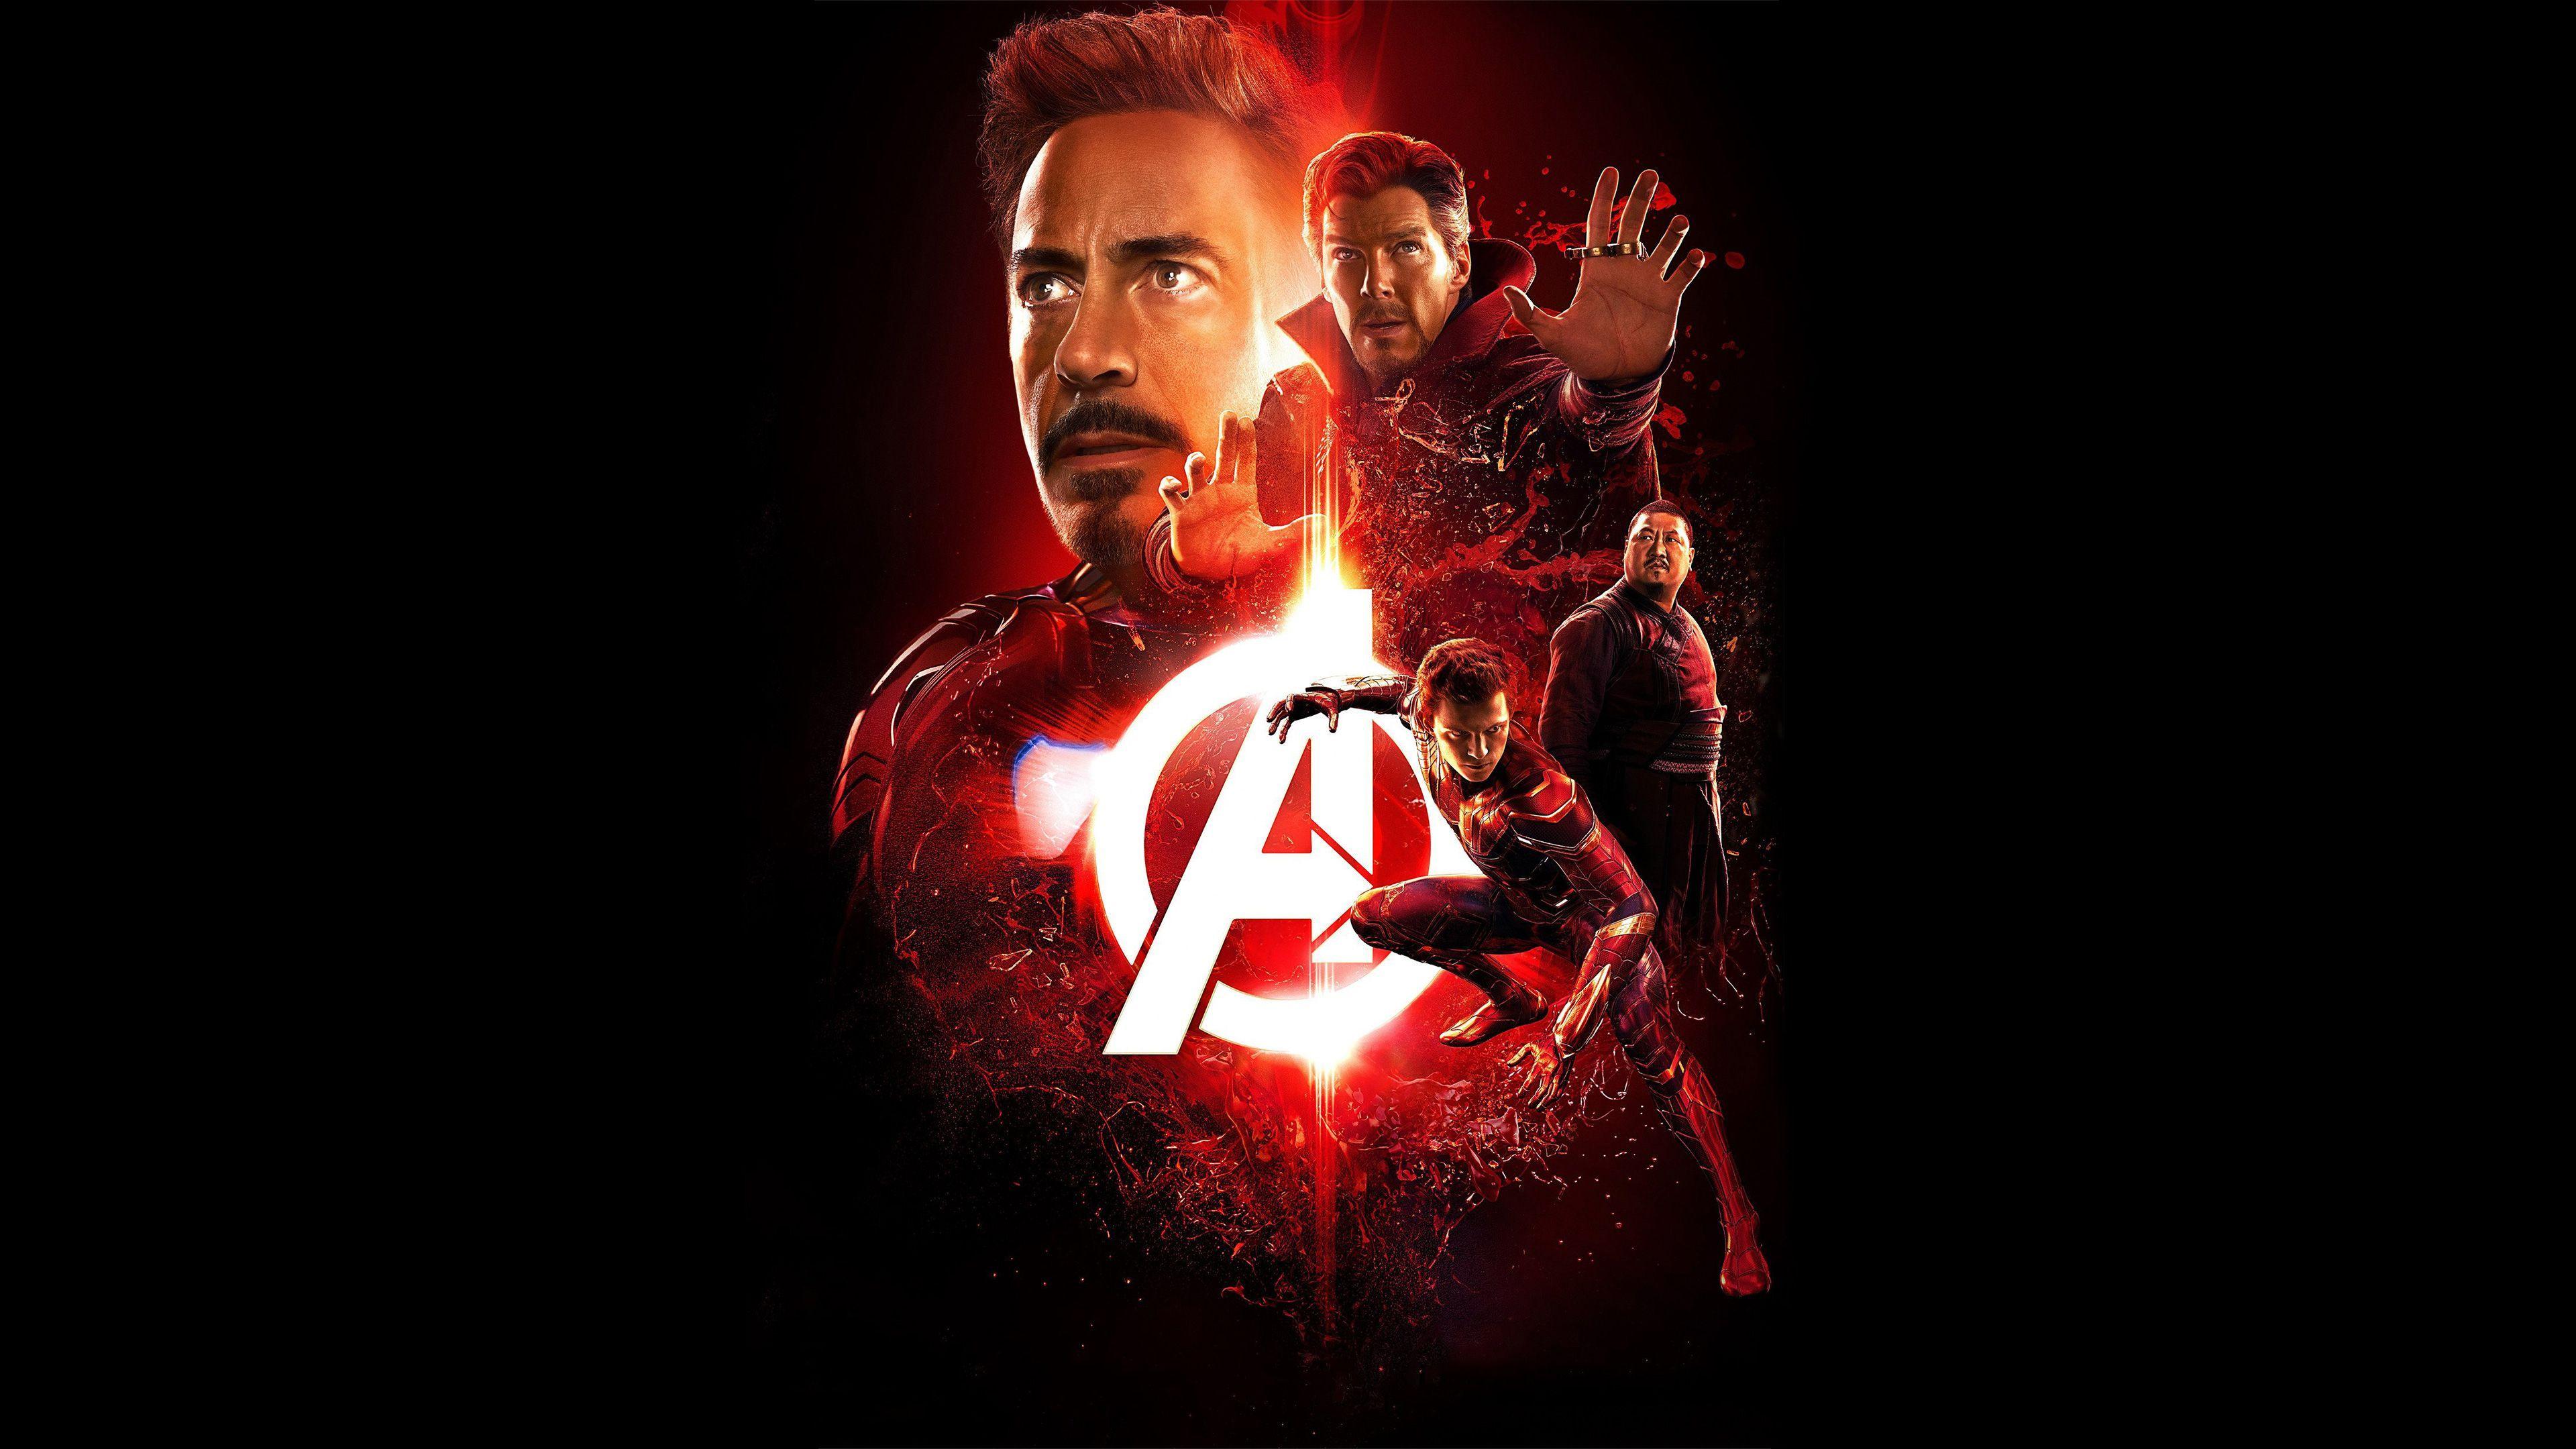 Avengers: Infinity War 4k Ultra HD Wallpapers and Backgrounds Image